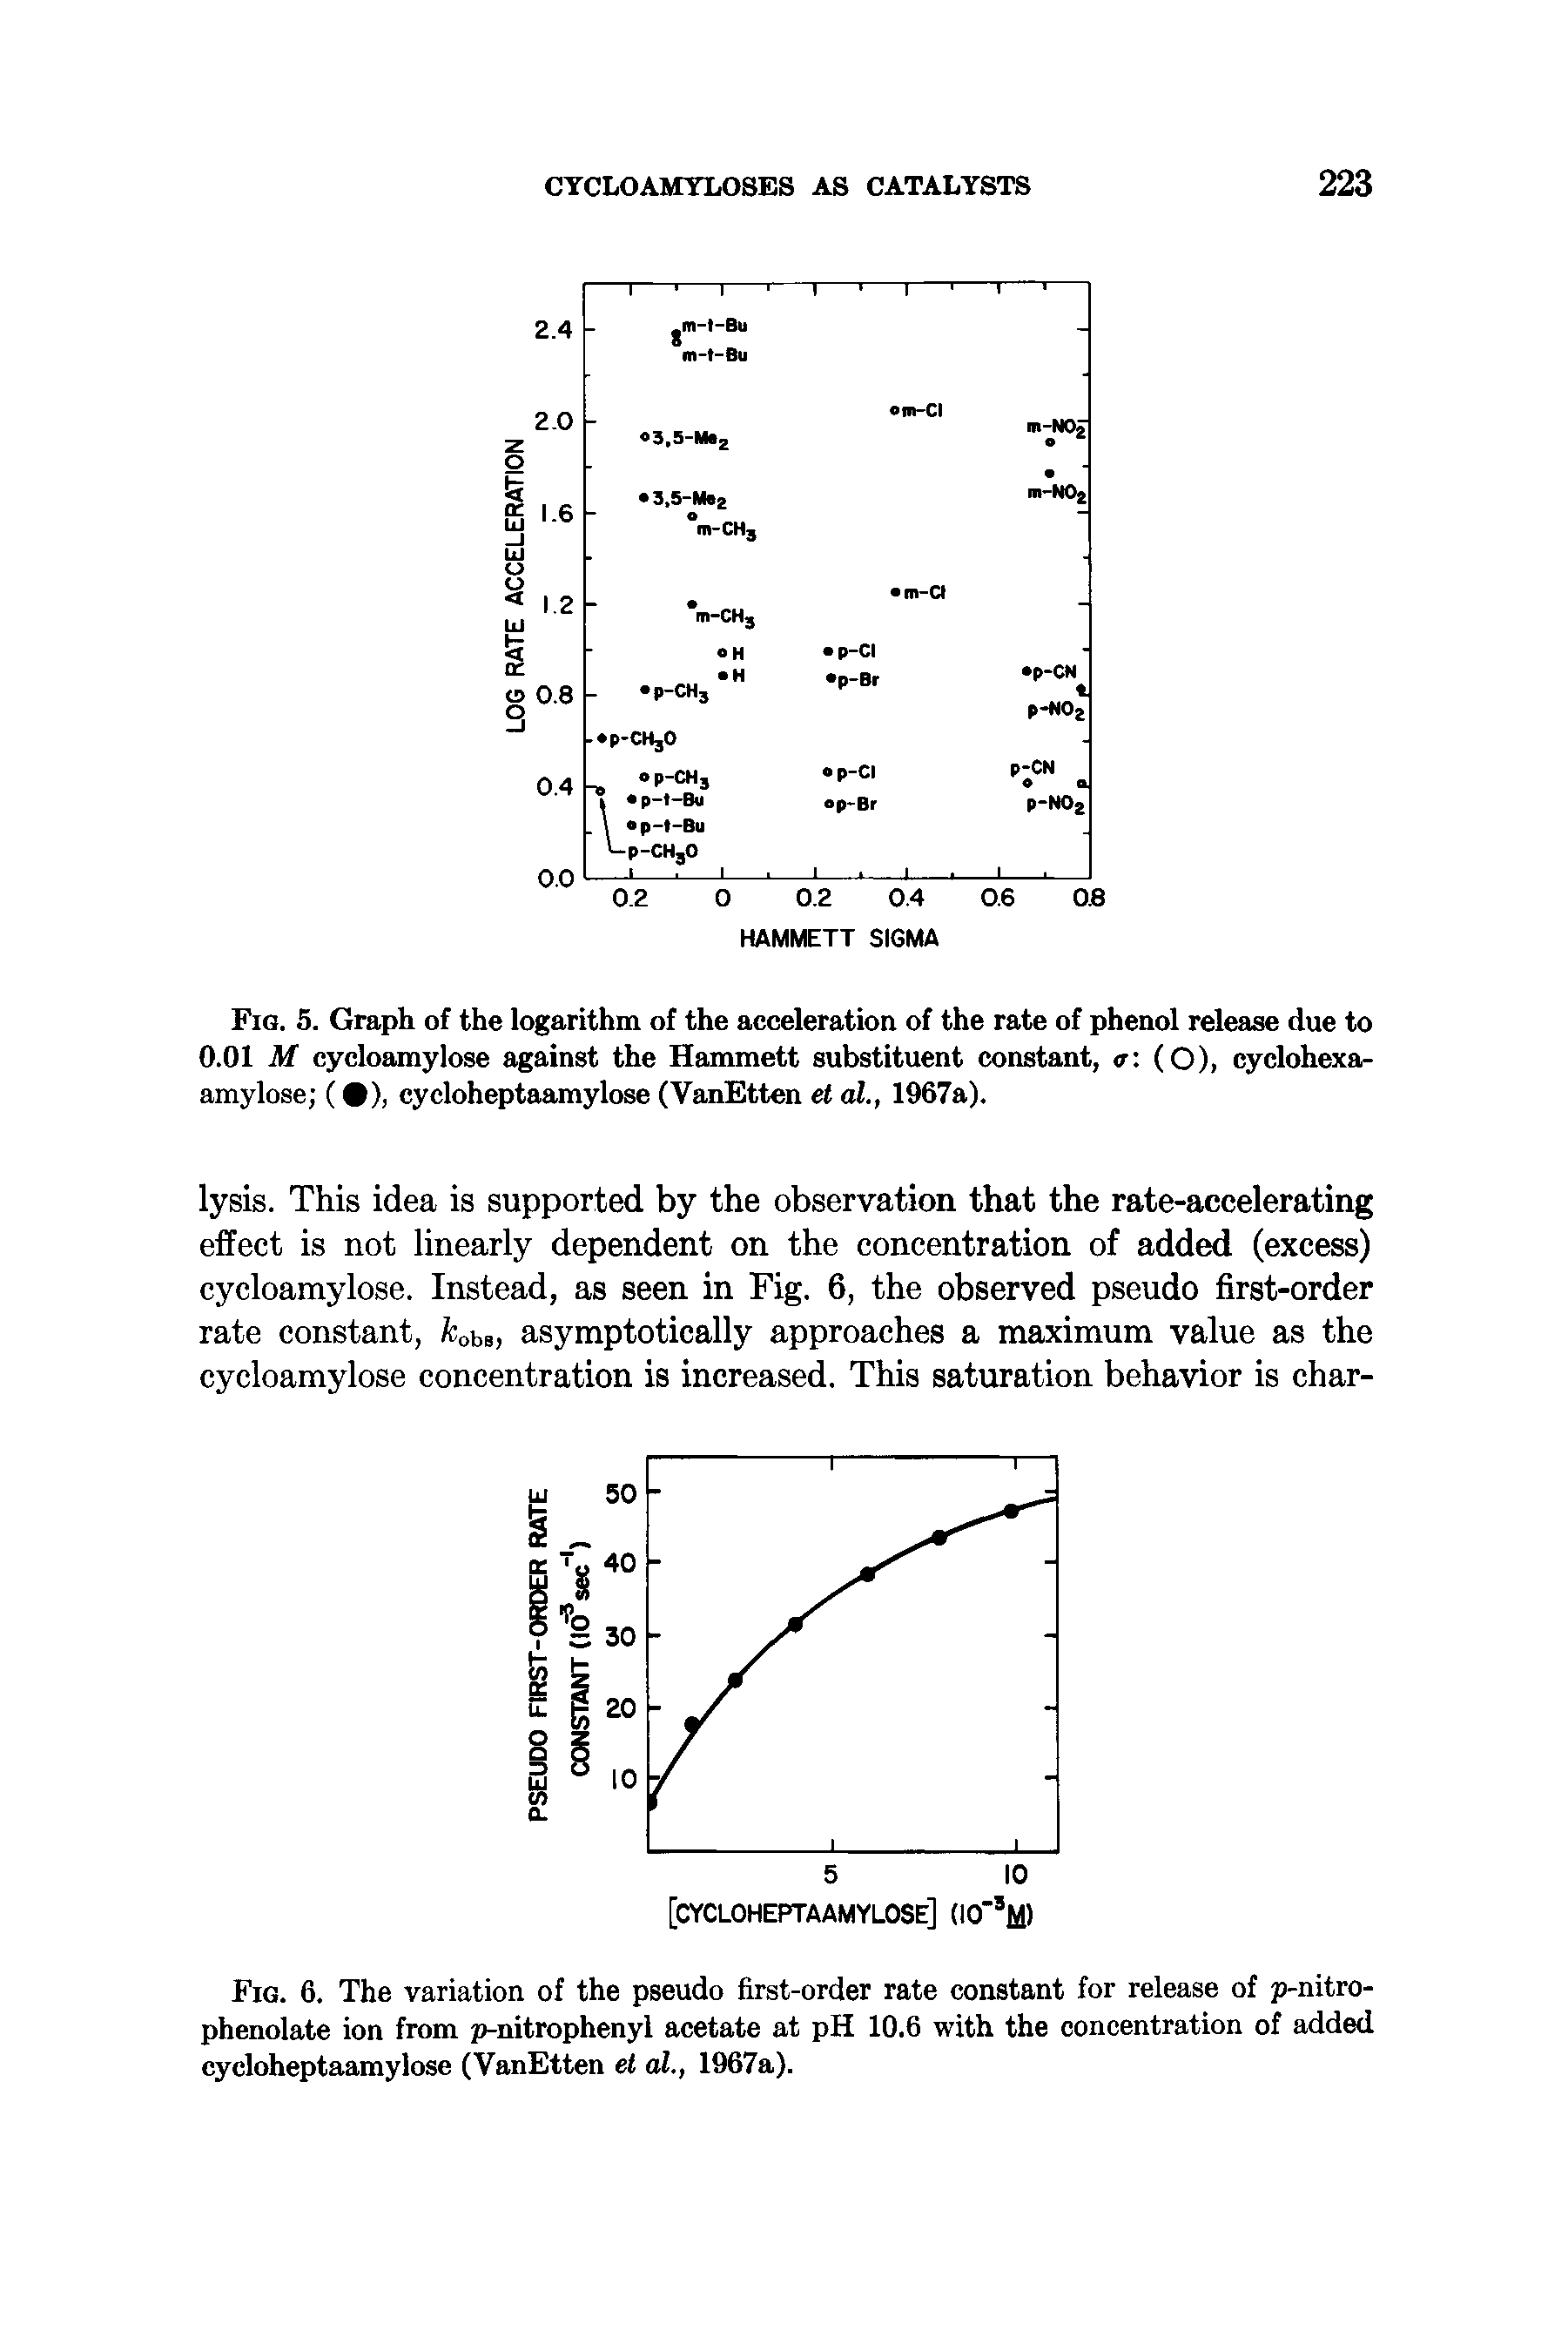 Fig. 6. The variation of the pseudo first-order rate constant for release of p-nitro-phenolate ion from p-nitrophenyl acetate at pH 10.6 with the concentration of added cycloheptaamylose (VanEtten et al., 1967a).